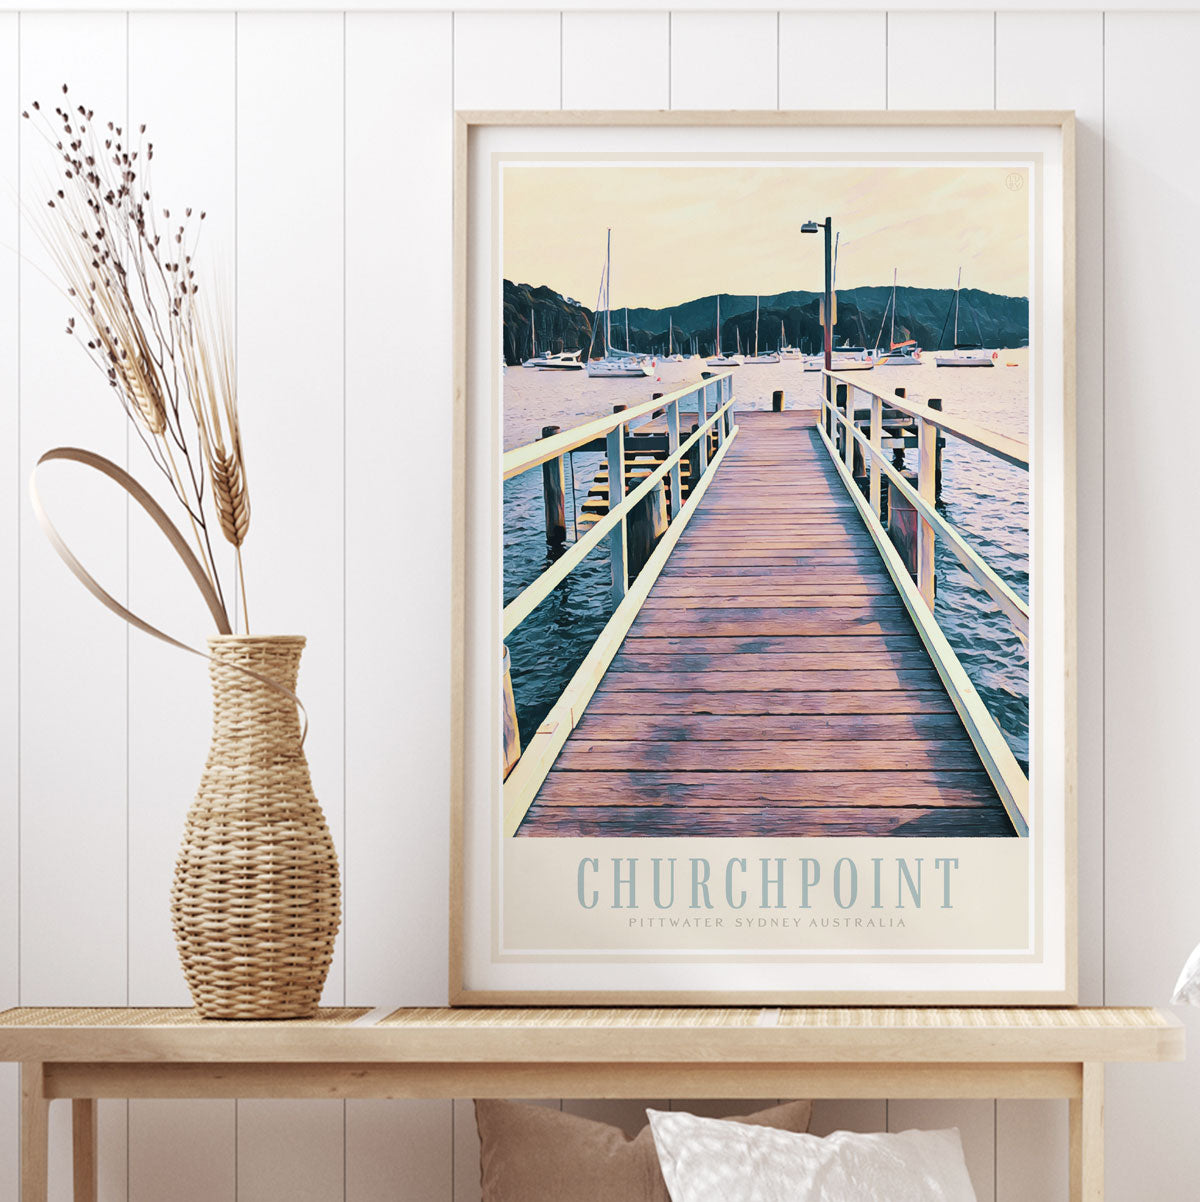 Churchpoint Sydney retro vintage travel poster from Places We Luv